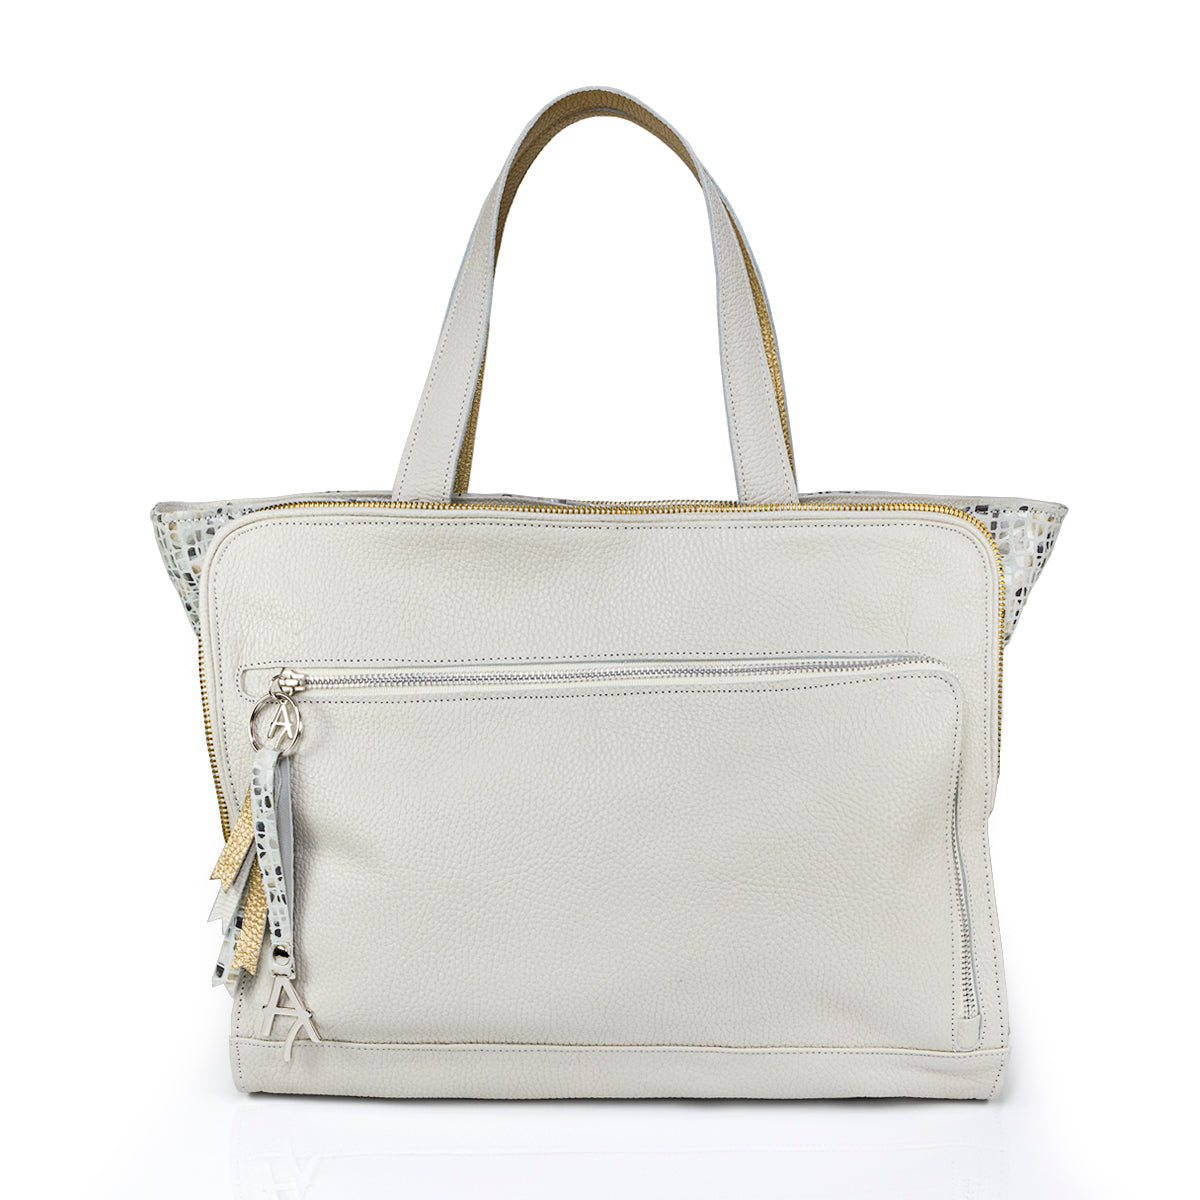 WOMEN'S BAG PASSION MARBLE GOLD